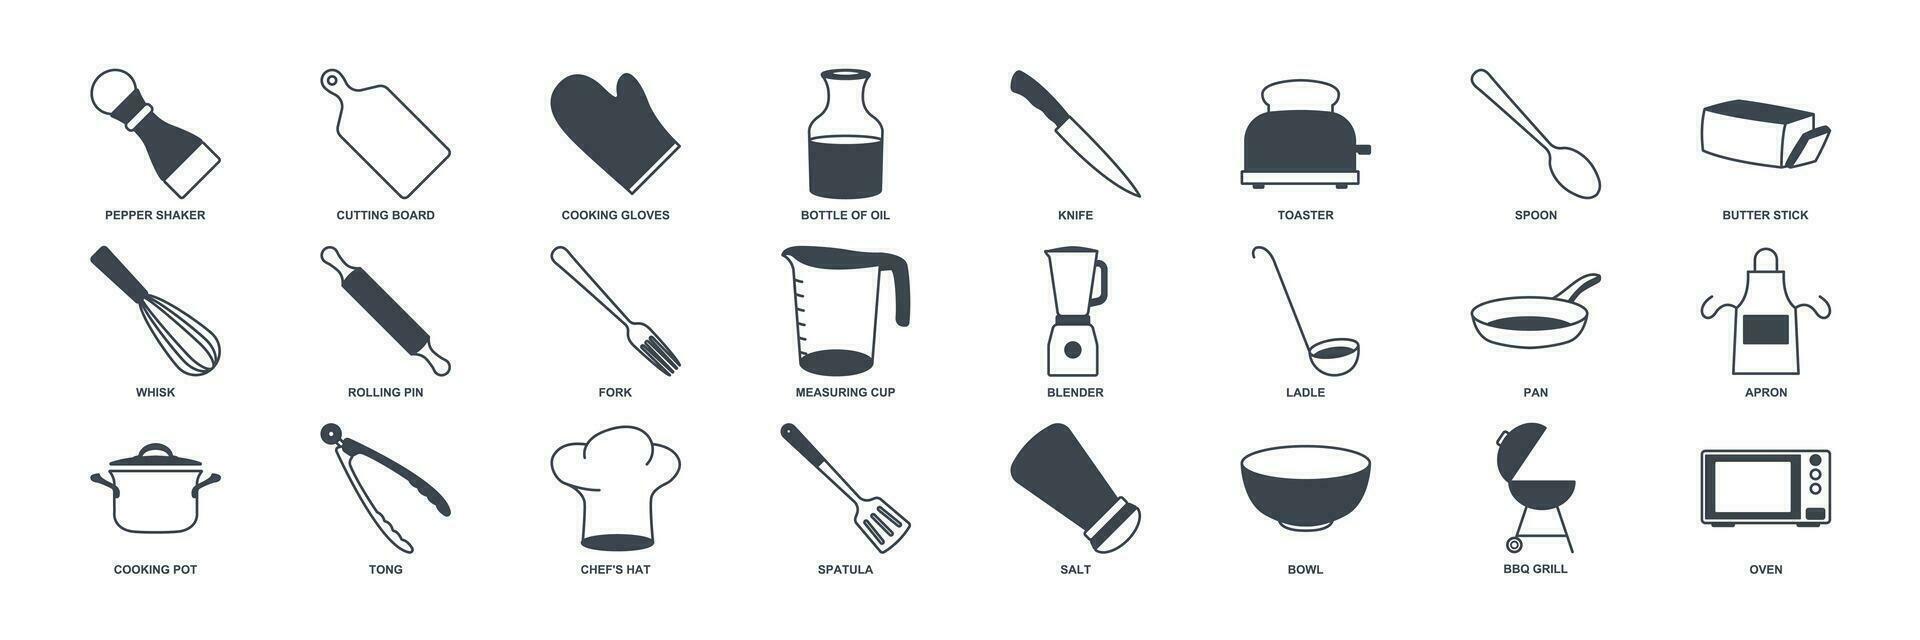 Cooking  icon set, Included icons as Knife, Bowl, Blender and more symbols collection, logo isolated vector illustration